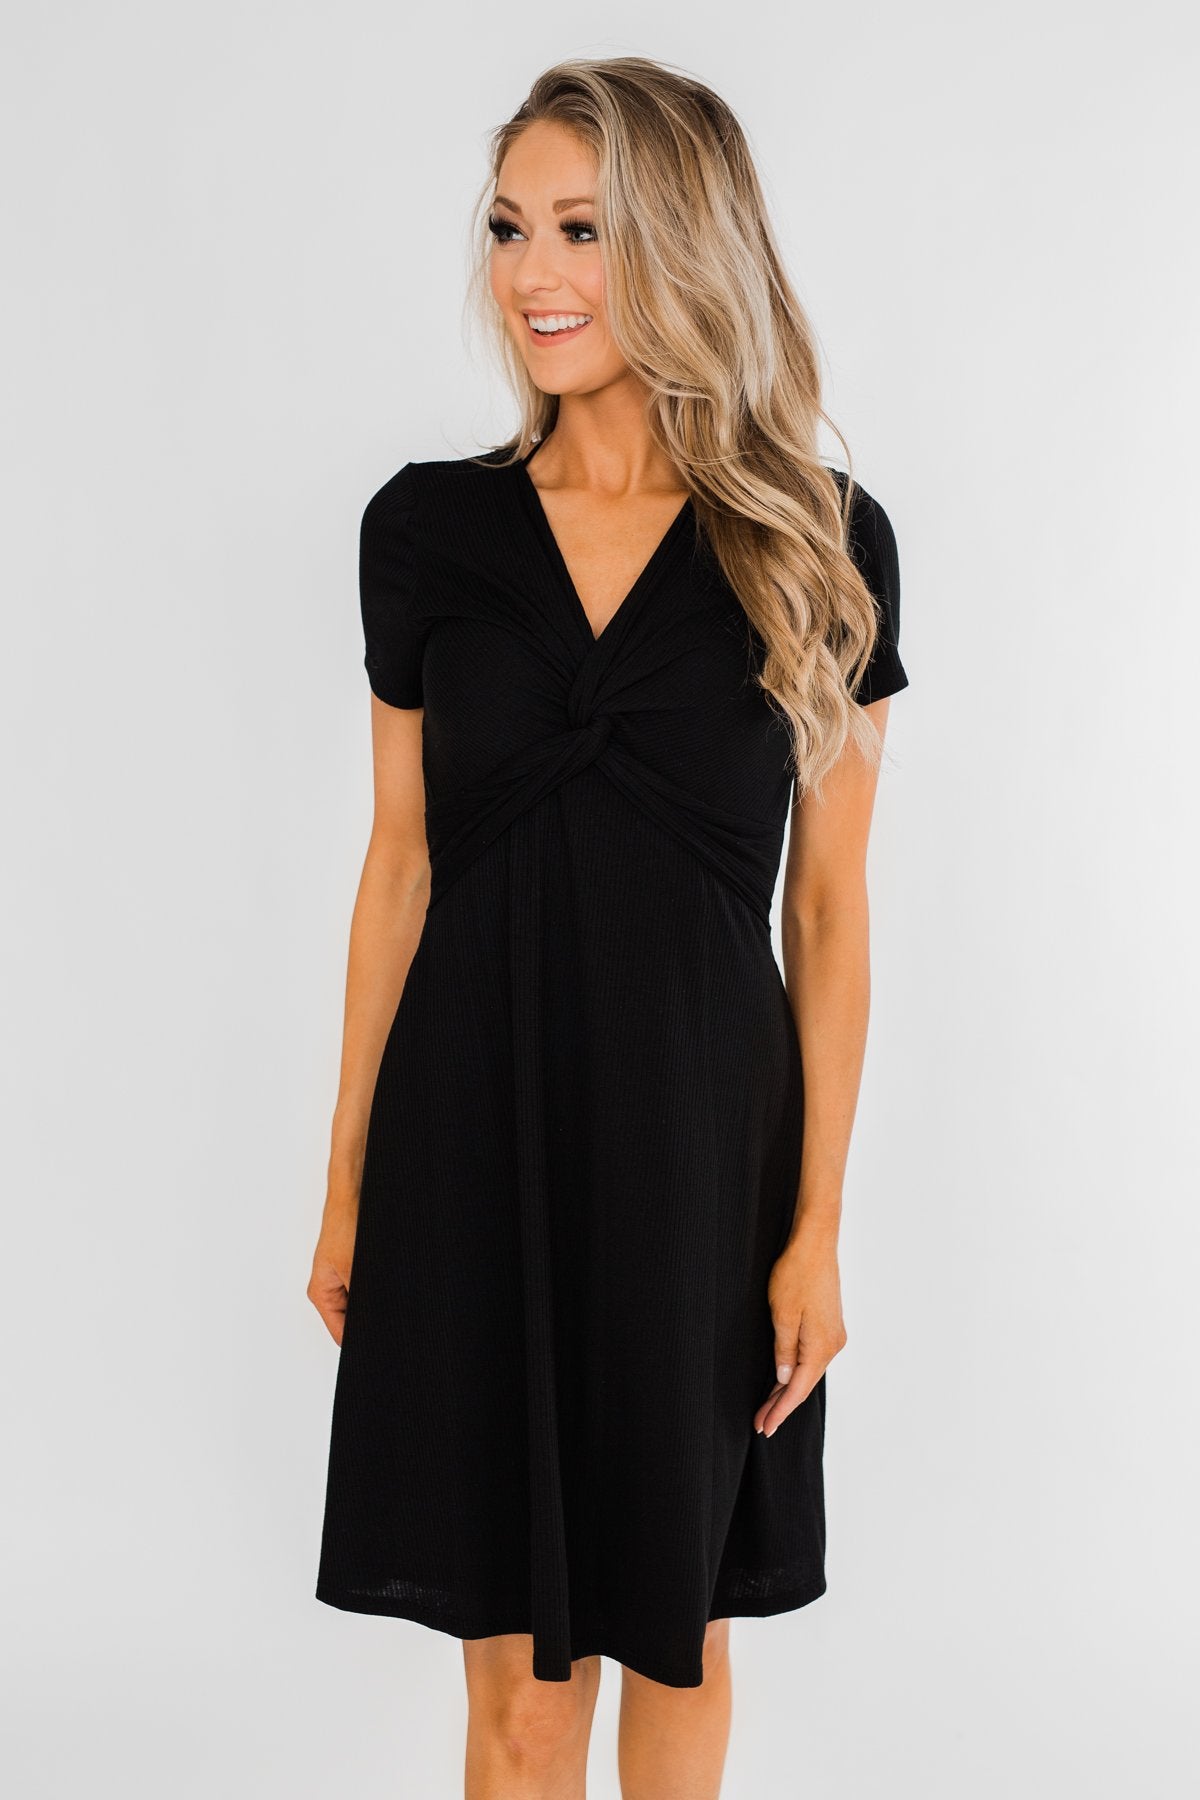 Tell Me More Front Knot Dress- Black